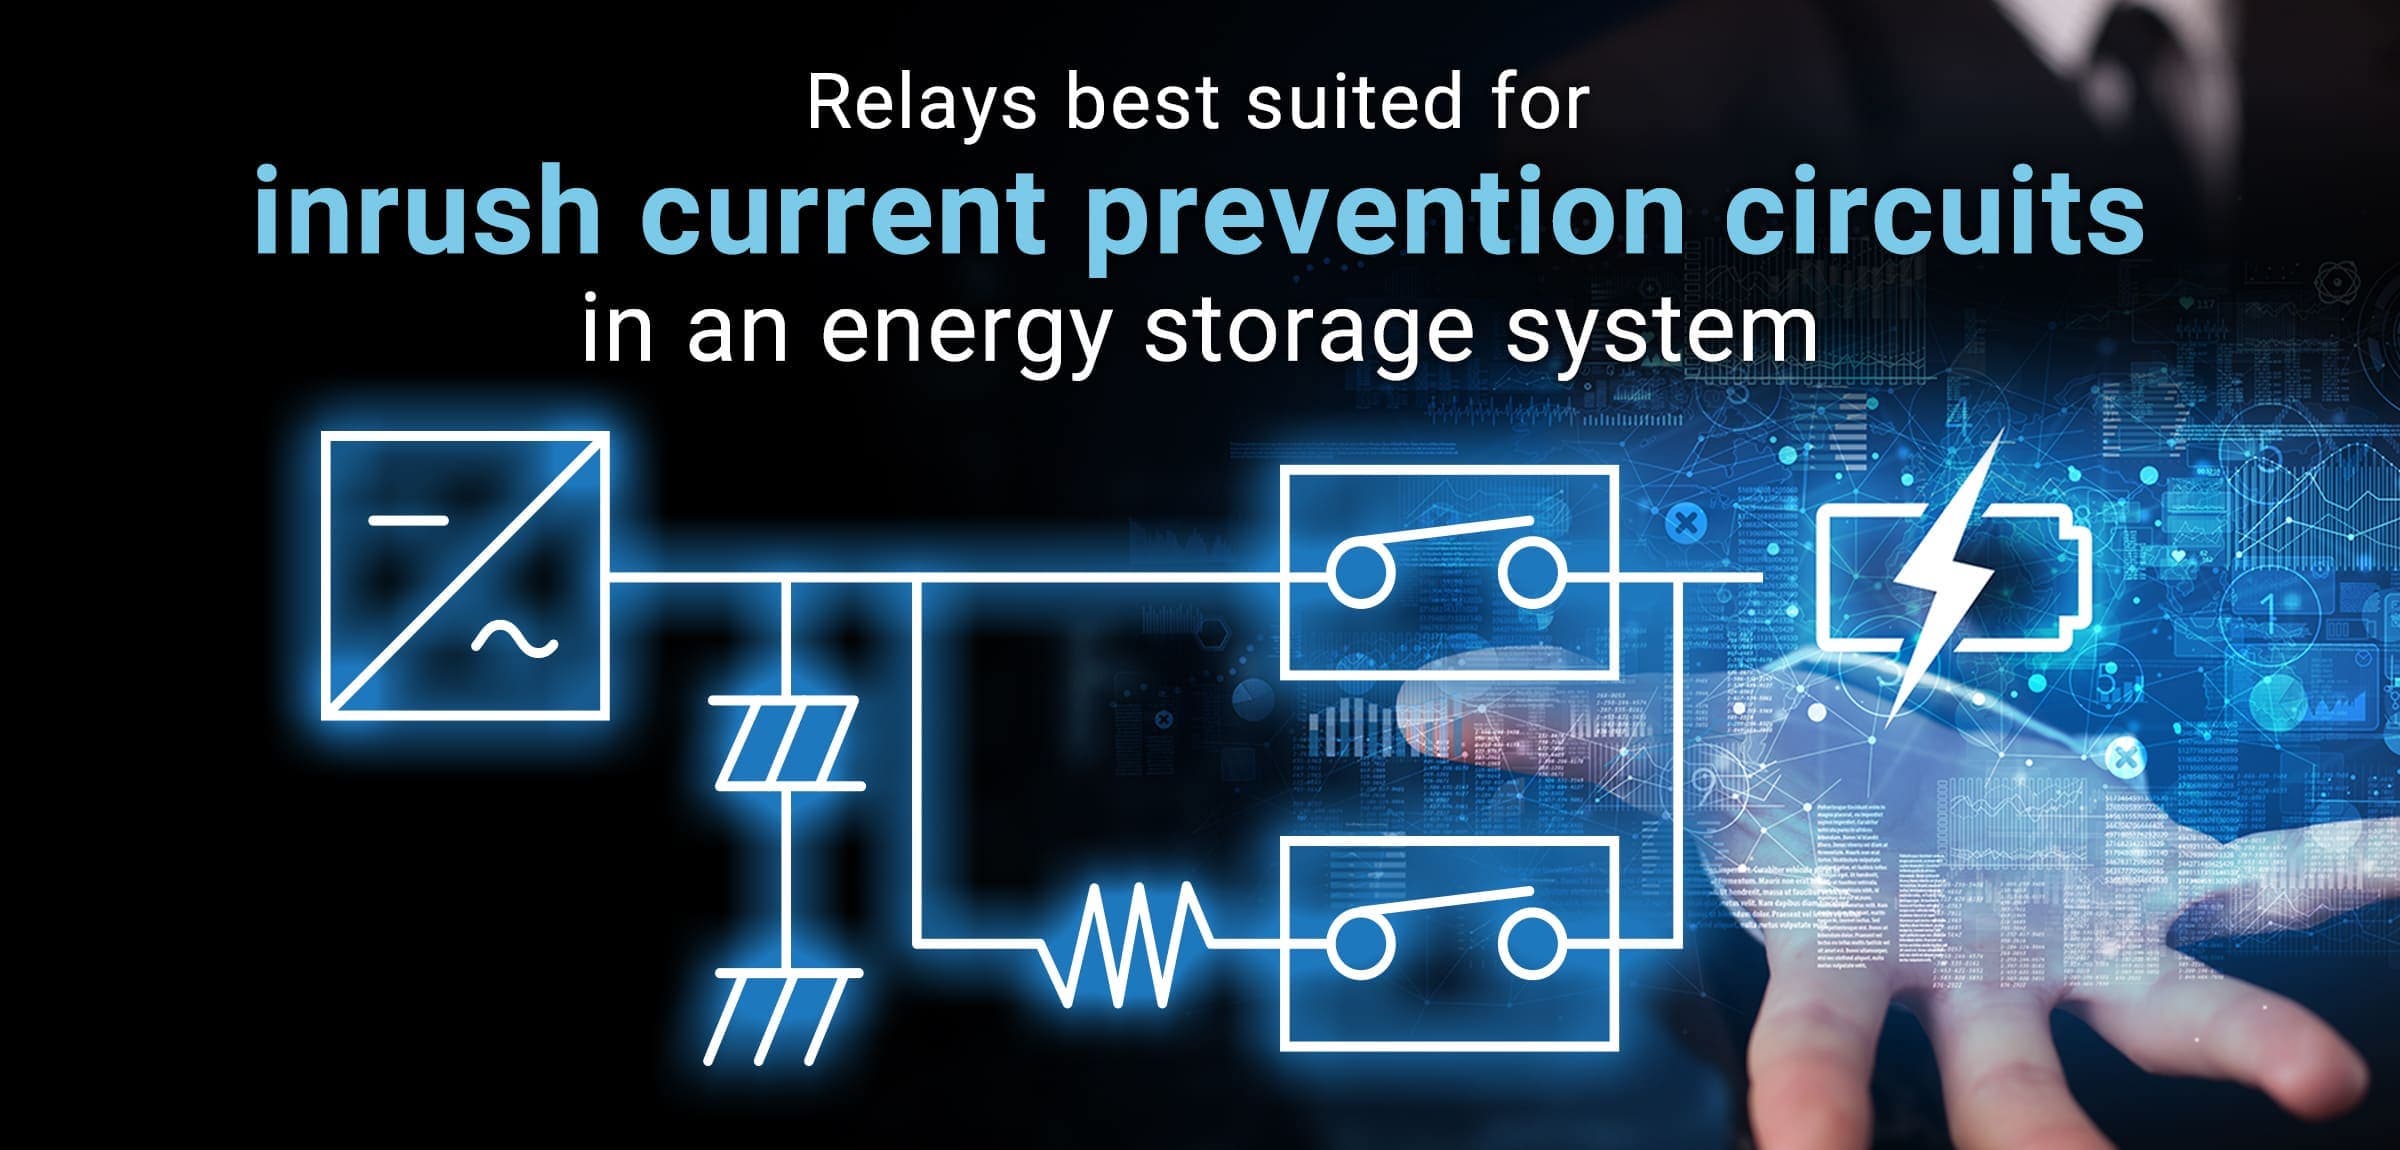 Relays best suited for inrush current prevention circuits in an energy storage system